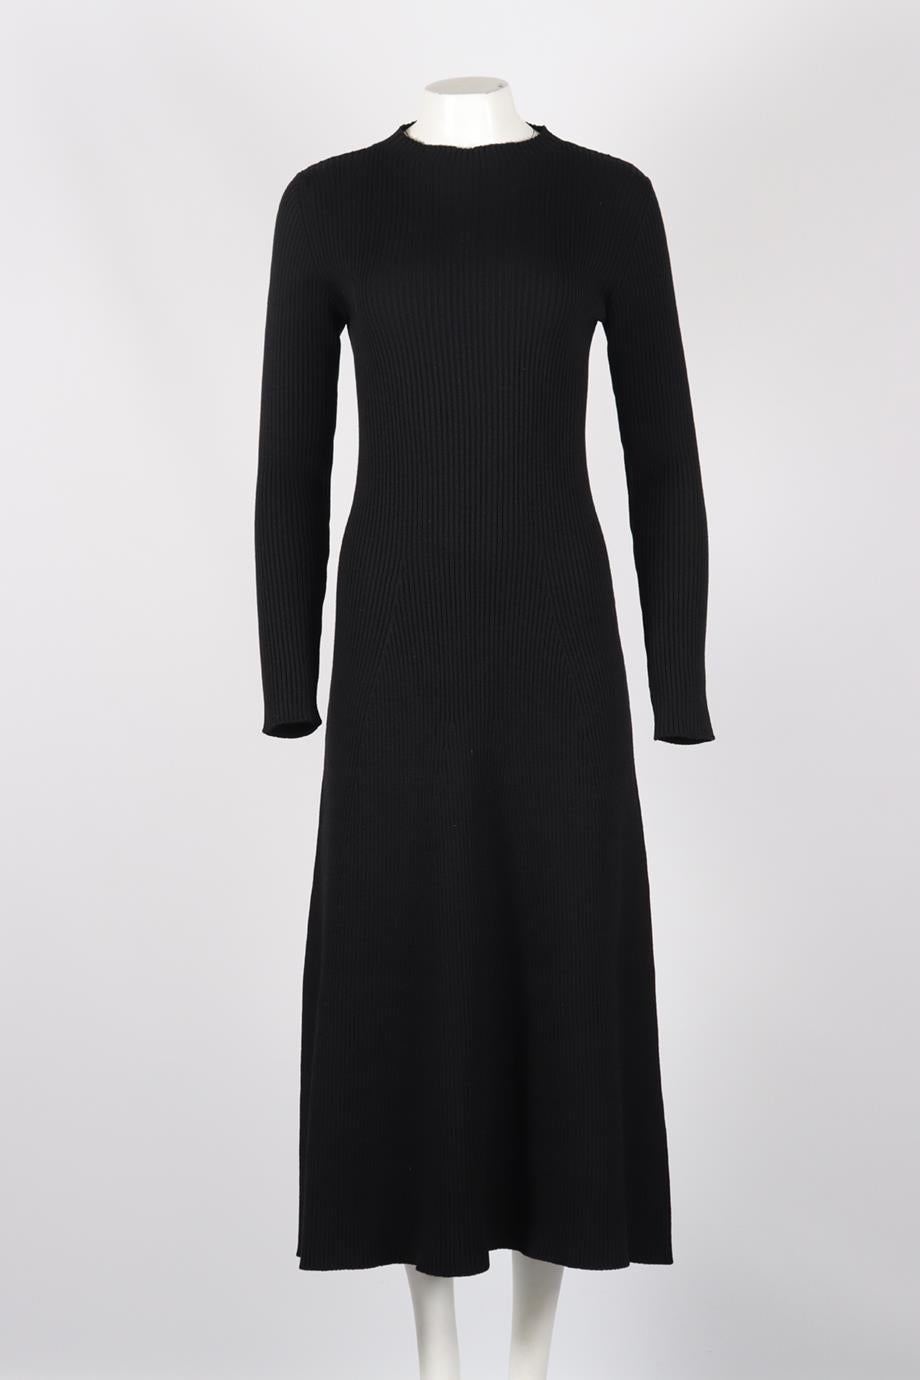 Prada Ribbed Wool Blend Midi Dress. Black. Long Sleeve. Mock Neck. Slips on. No composition label. Large (UK 12, US 8, FR 40, IT 44). Bust: 34 in. Waist: 30 in. Hips: 46 in. Length: 50 in. Condition: Used. Very good condition - Size and composition